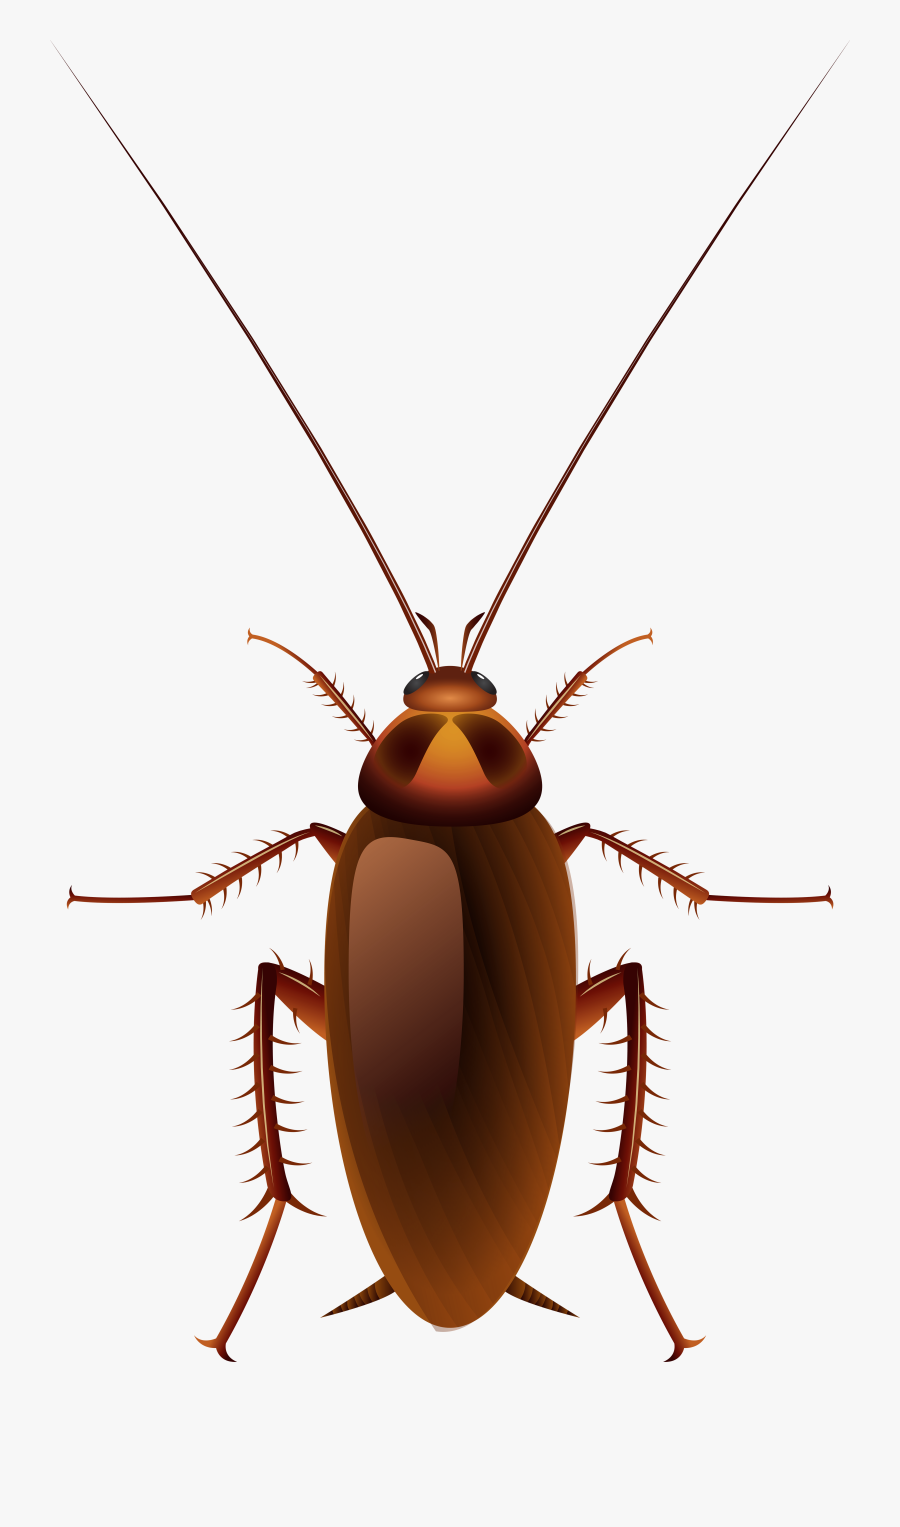 Insects Clipart Beautiful Animal - Black Cockroach Cartoon, Transparent Clipart